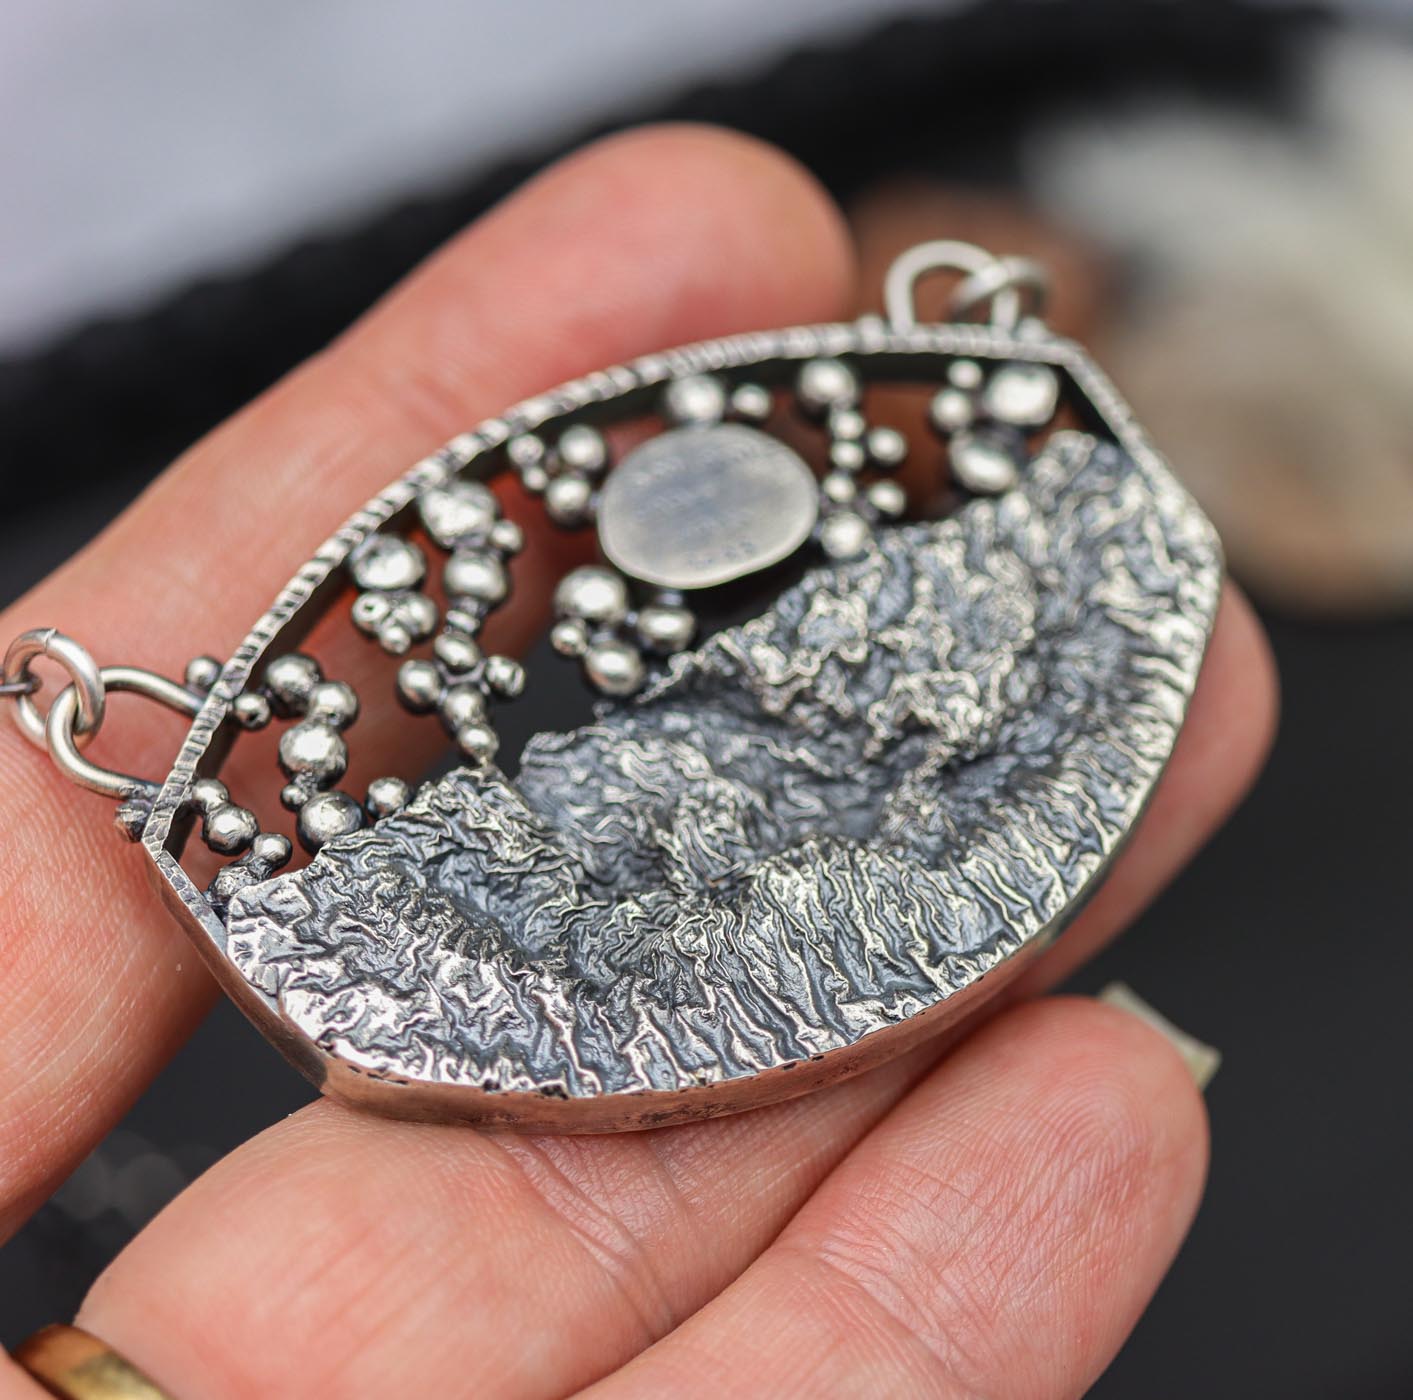 The Moonrise Pendant Grey Moonstone Necklace Sterling Silver and 22k Gold